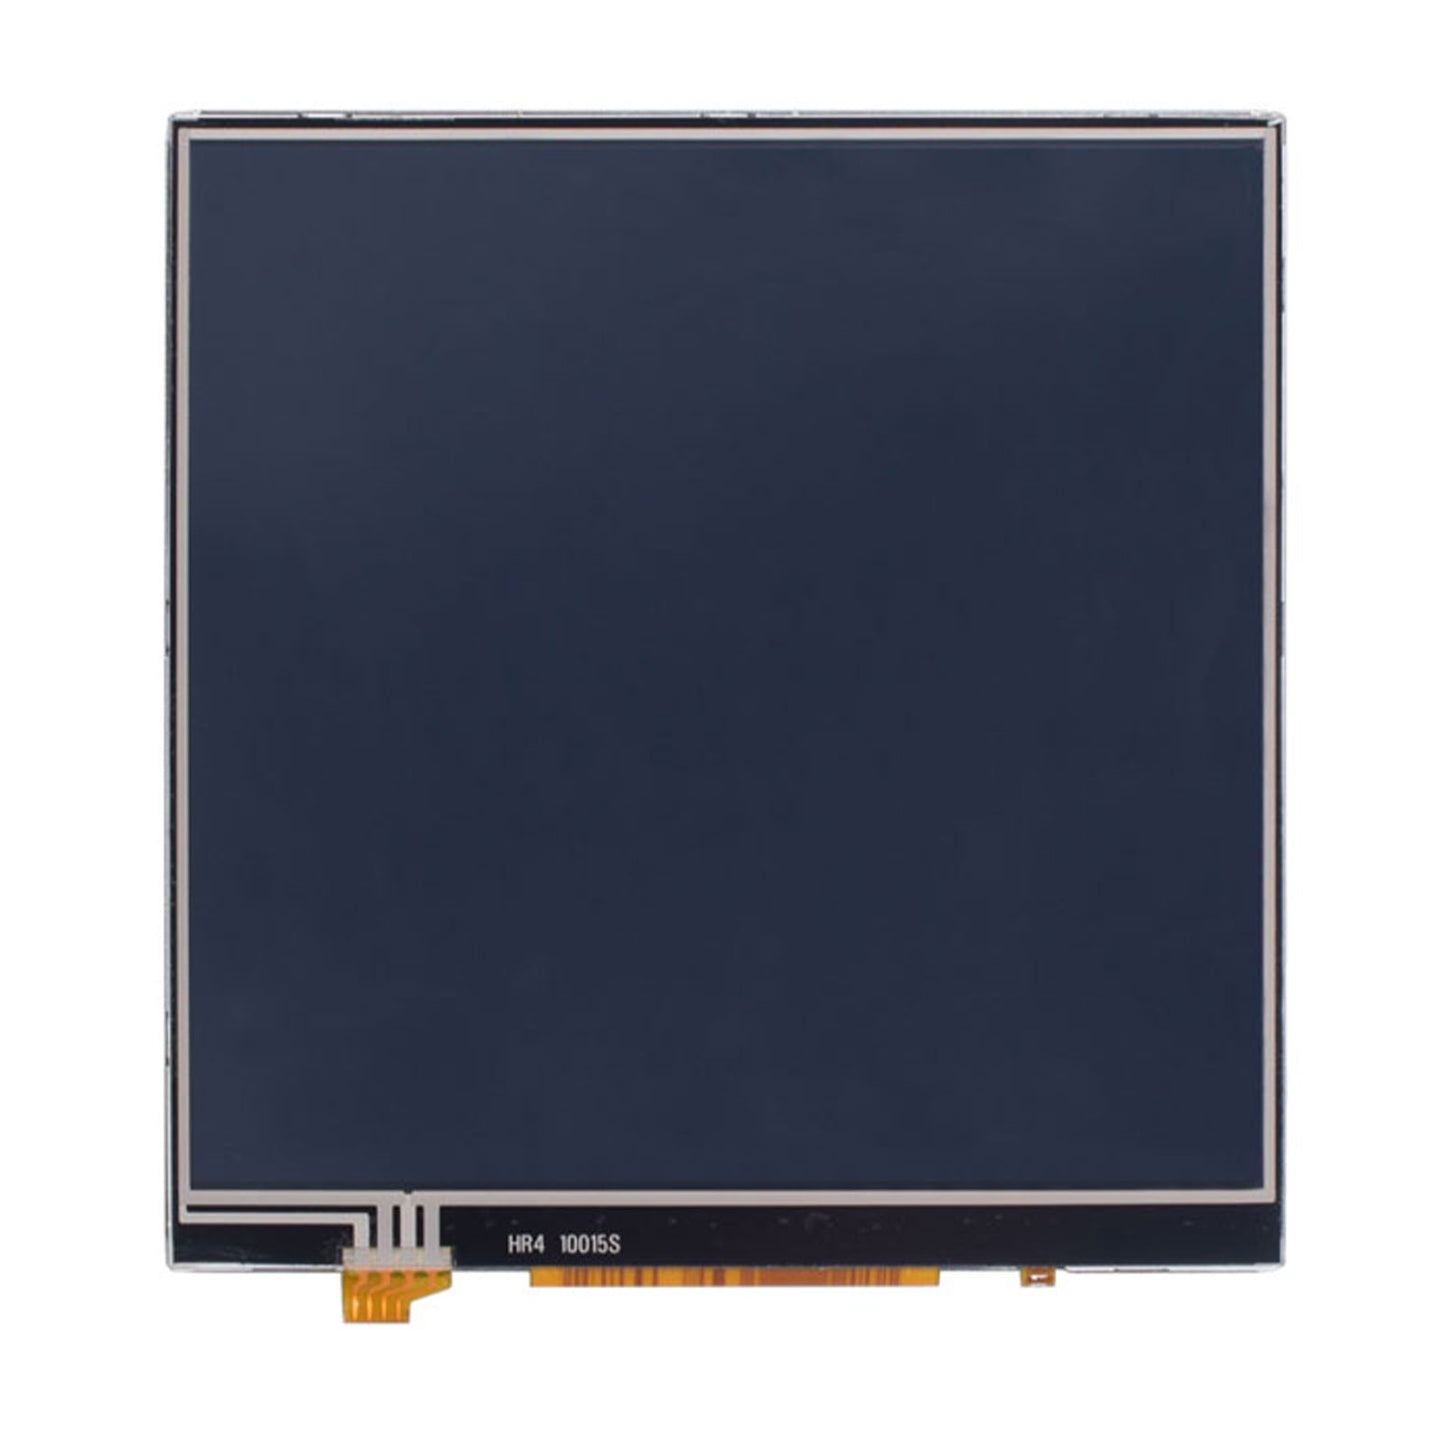 DisplayModule 4.0" IPS 480X480 High Brightness TFT Display Panel With Resistive Touch –RGB